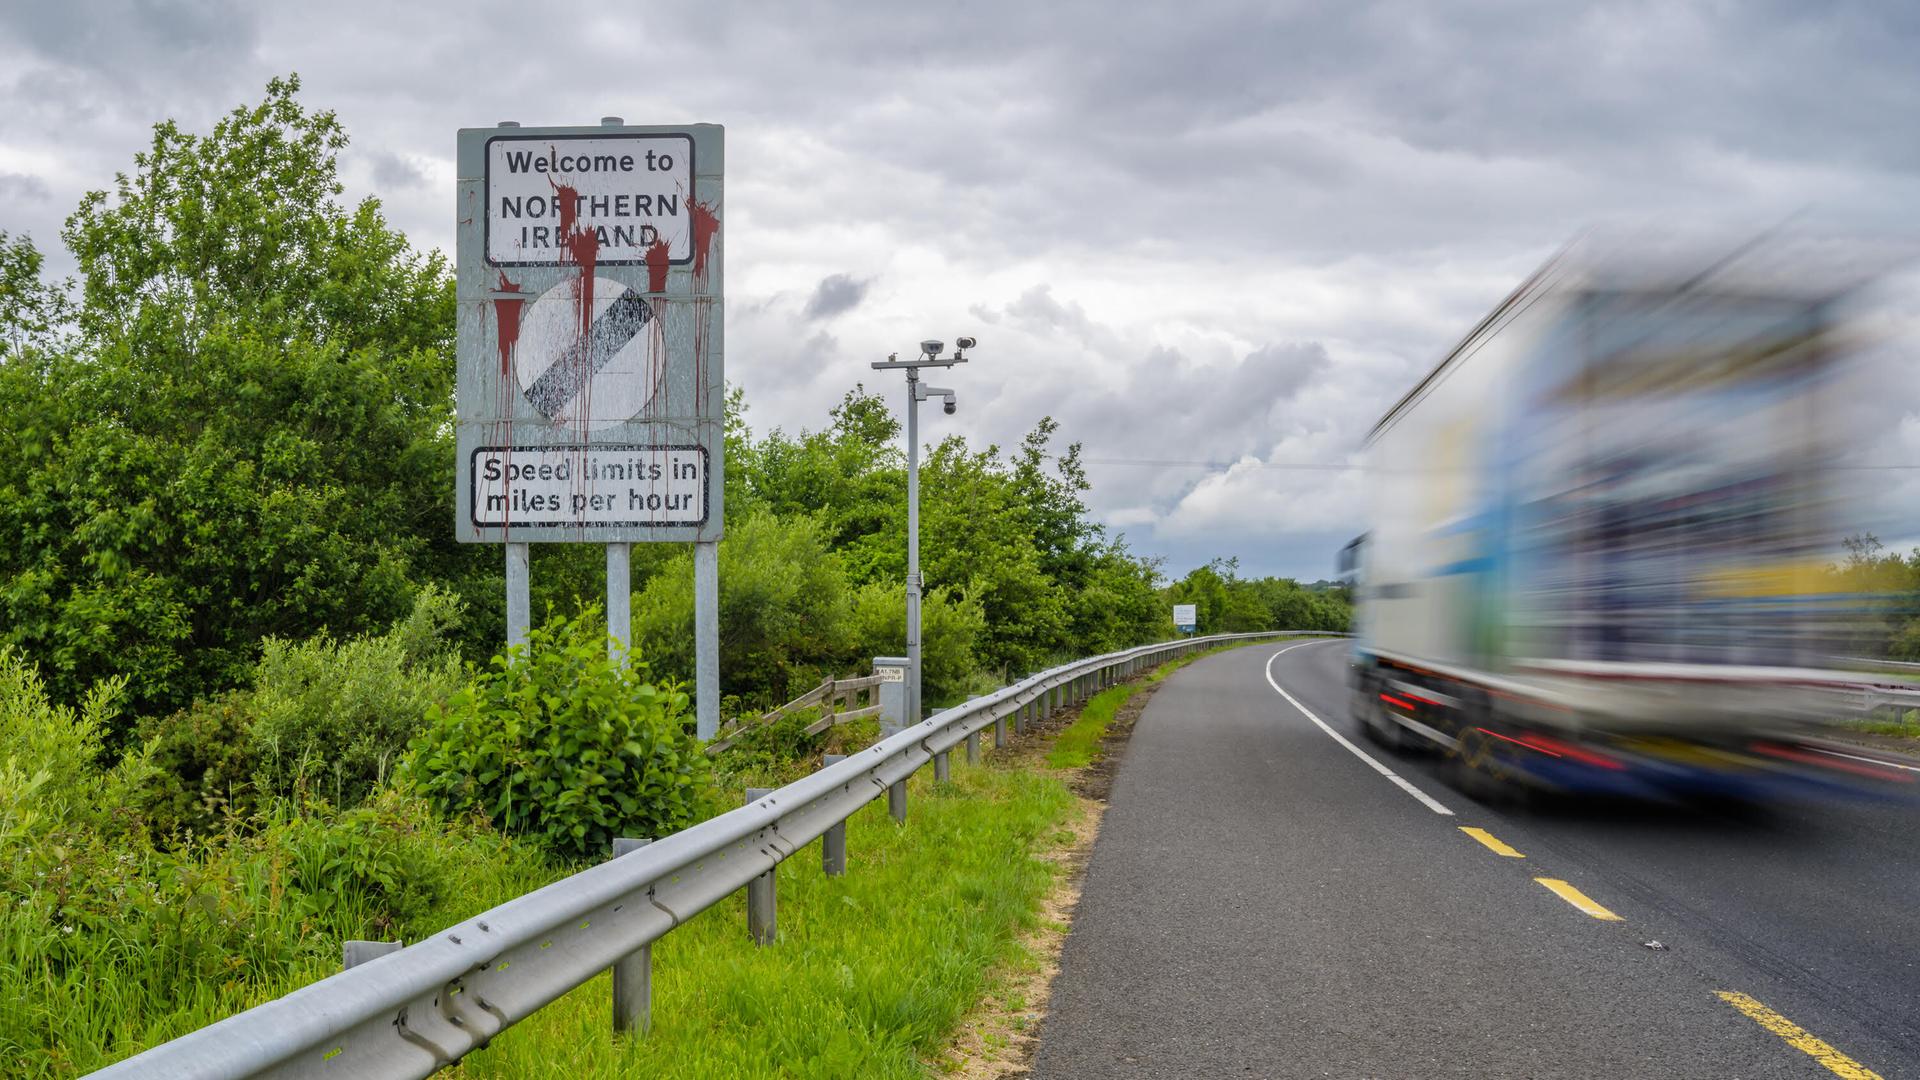 (220614) -- BELFAST, June 14, 2022 (Xinhua) -- A vehicle moves past a border sign near Newry, Northern Ireland, the United Kingdom, on June 14, 2022. The United Kingdom (UK) on Monday introduced a bill to change parts of the Northern Ireland Protocol, a post-Brexit trade deal, while the European Union (EU) said unilateral action is damaging to mutual trust and threatened legal action. TO GO WITH "Roundup: UK reveals plan to change N. Ireland Protocol as EU threatens legal action " (Photo by Colum Lynch/Xinhua)